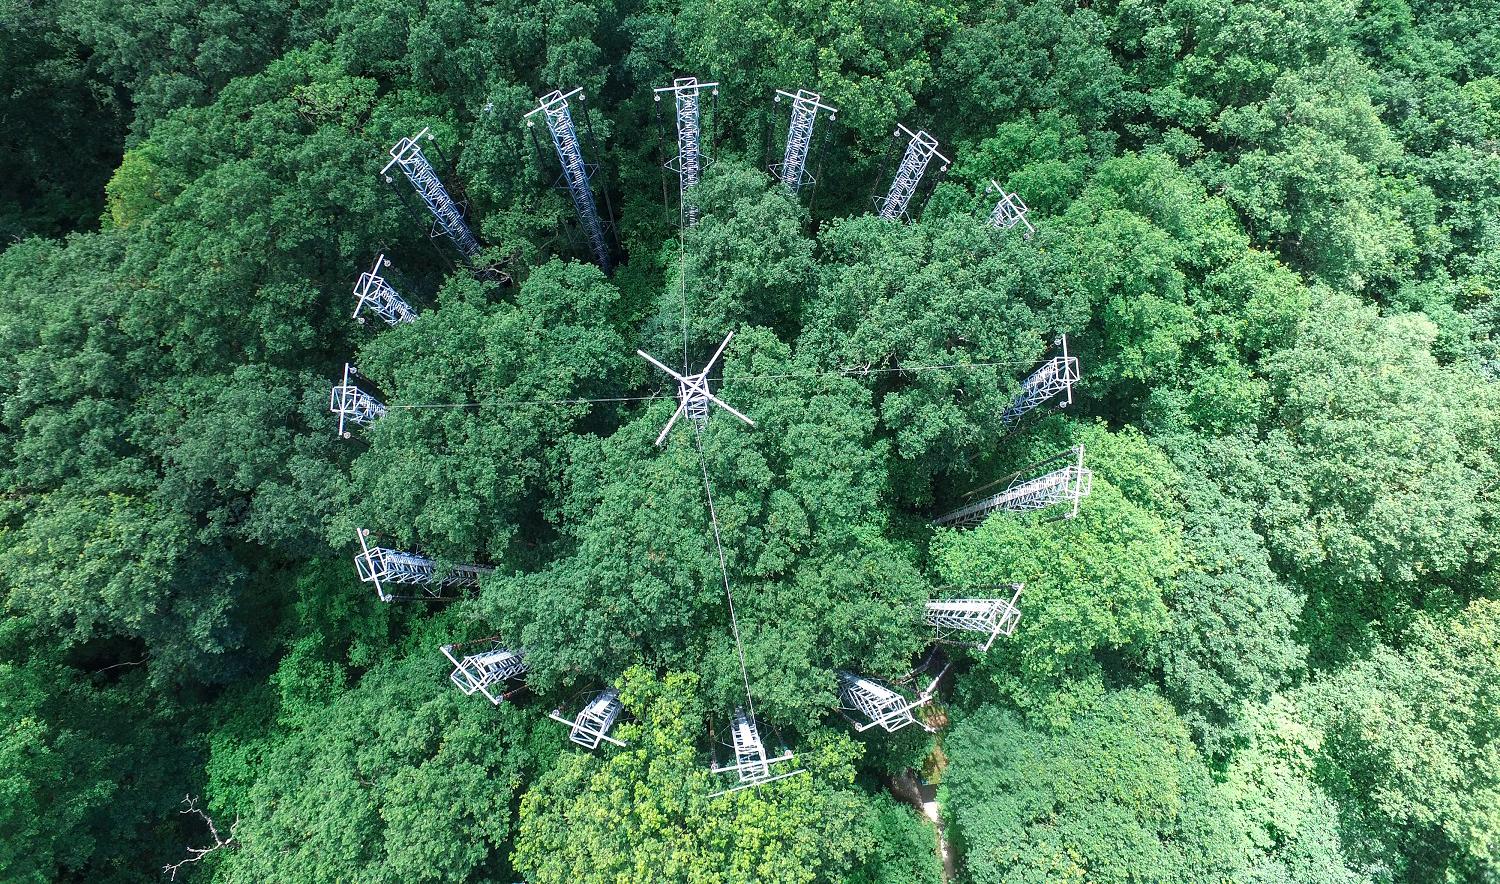 Looking down on a ring of metal pylons in a mature oak forest